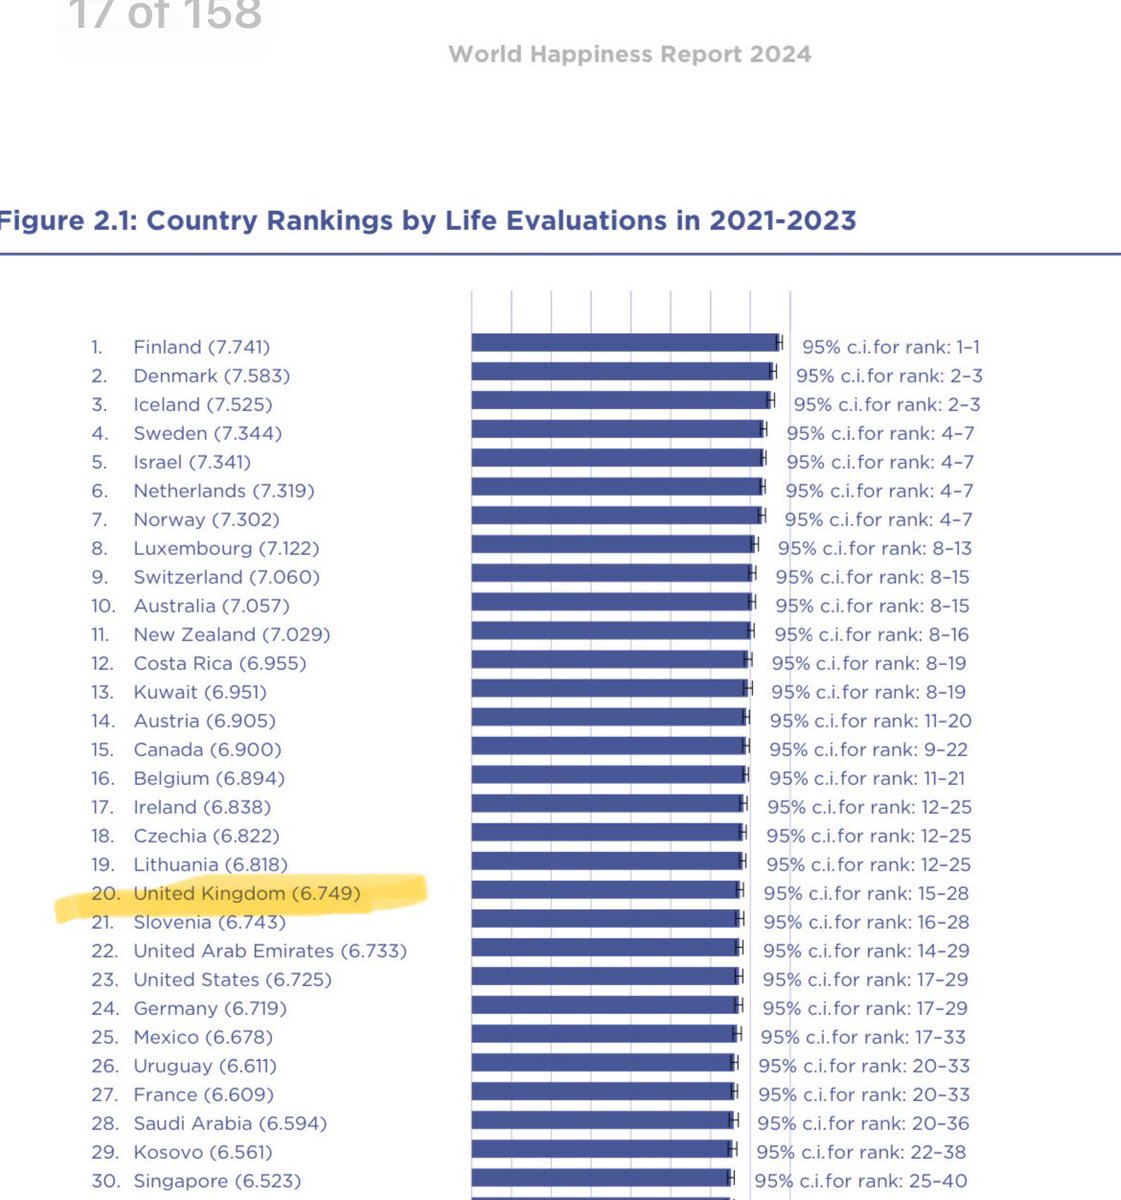 Short thread on UK 🇬🇧 and @happinessrpt thread 🧵 1. This is where UK is number 20 - this is the highest for any country over 30 million people. (There is variation within the UK… read on)